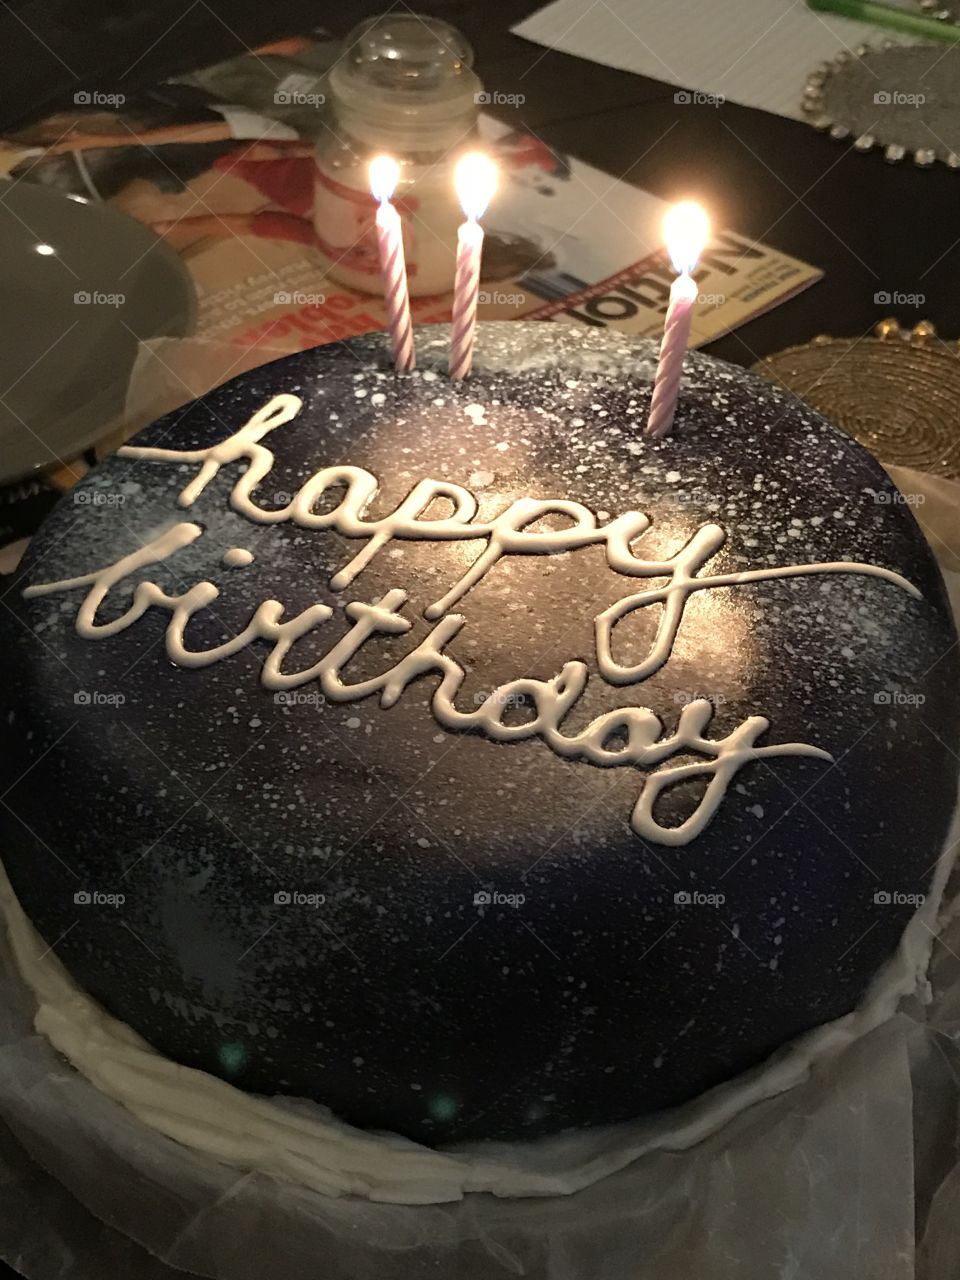 Space cake!